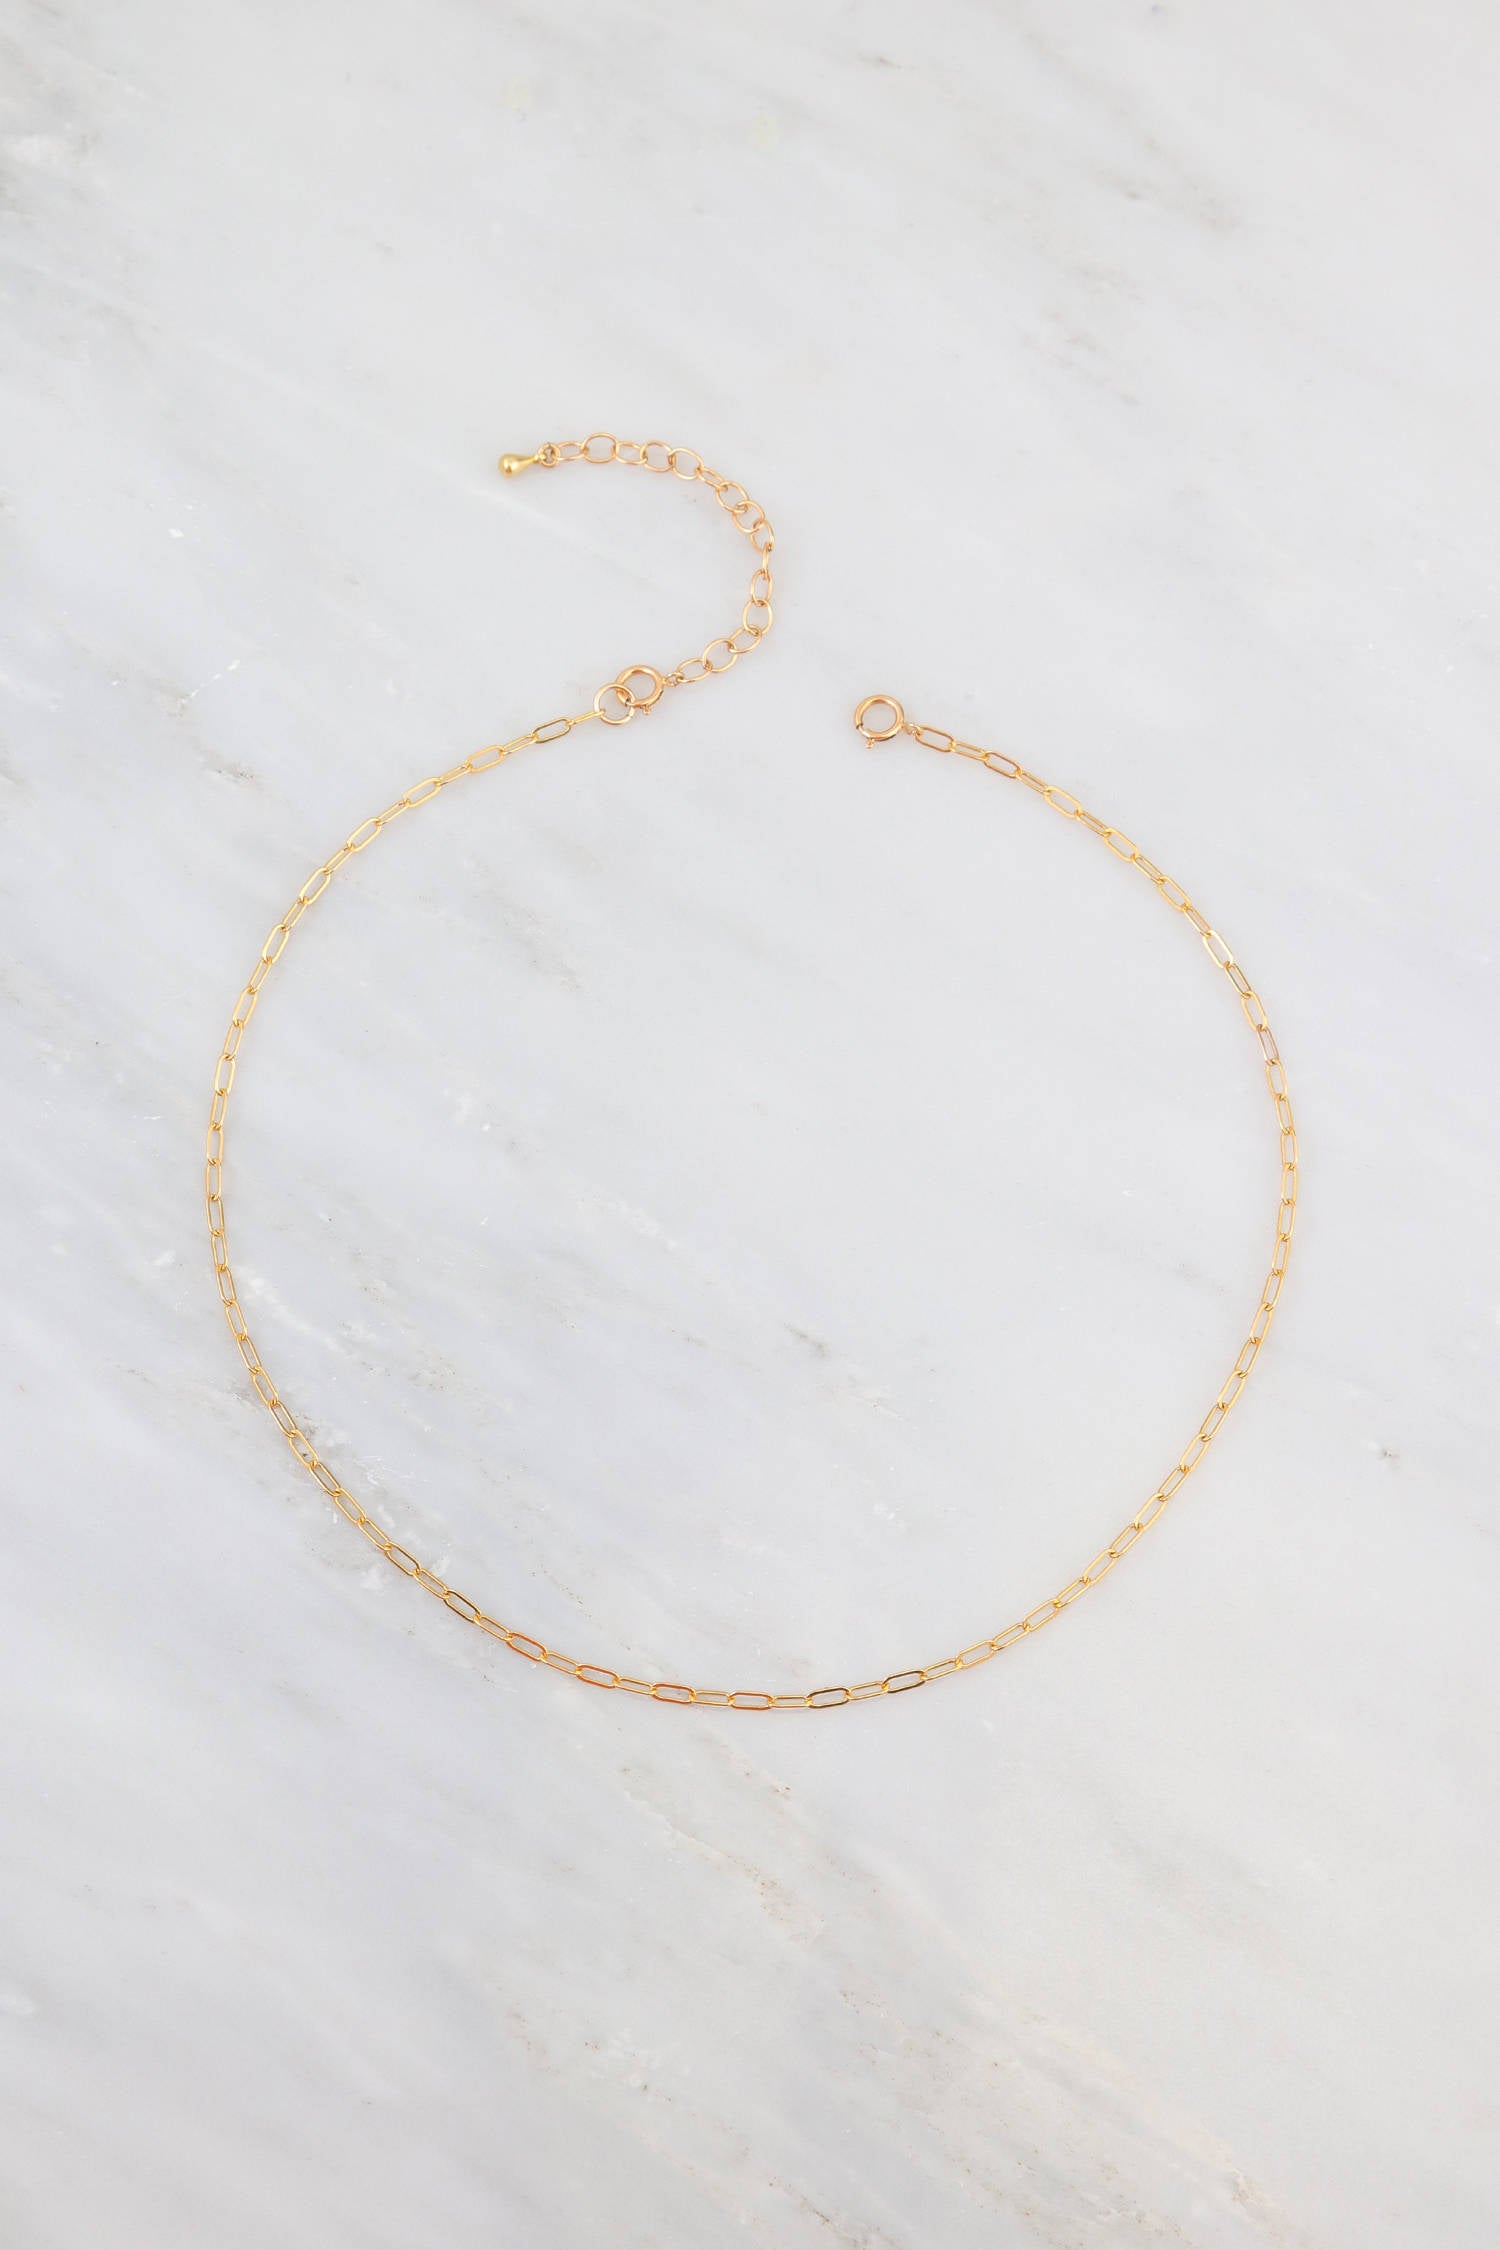 Gold Curved Bar Necklaces Set of Two Layered Everyday Necklaces Delicate  Gold Tube Necklaces Gold Filled Jewelry. - Etsy